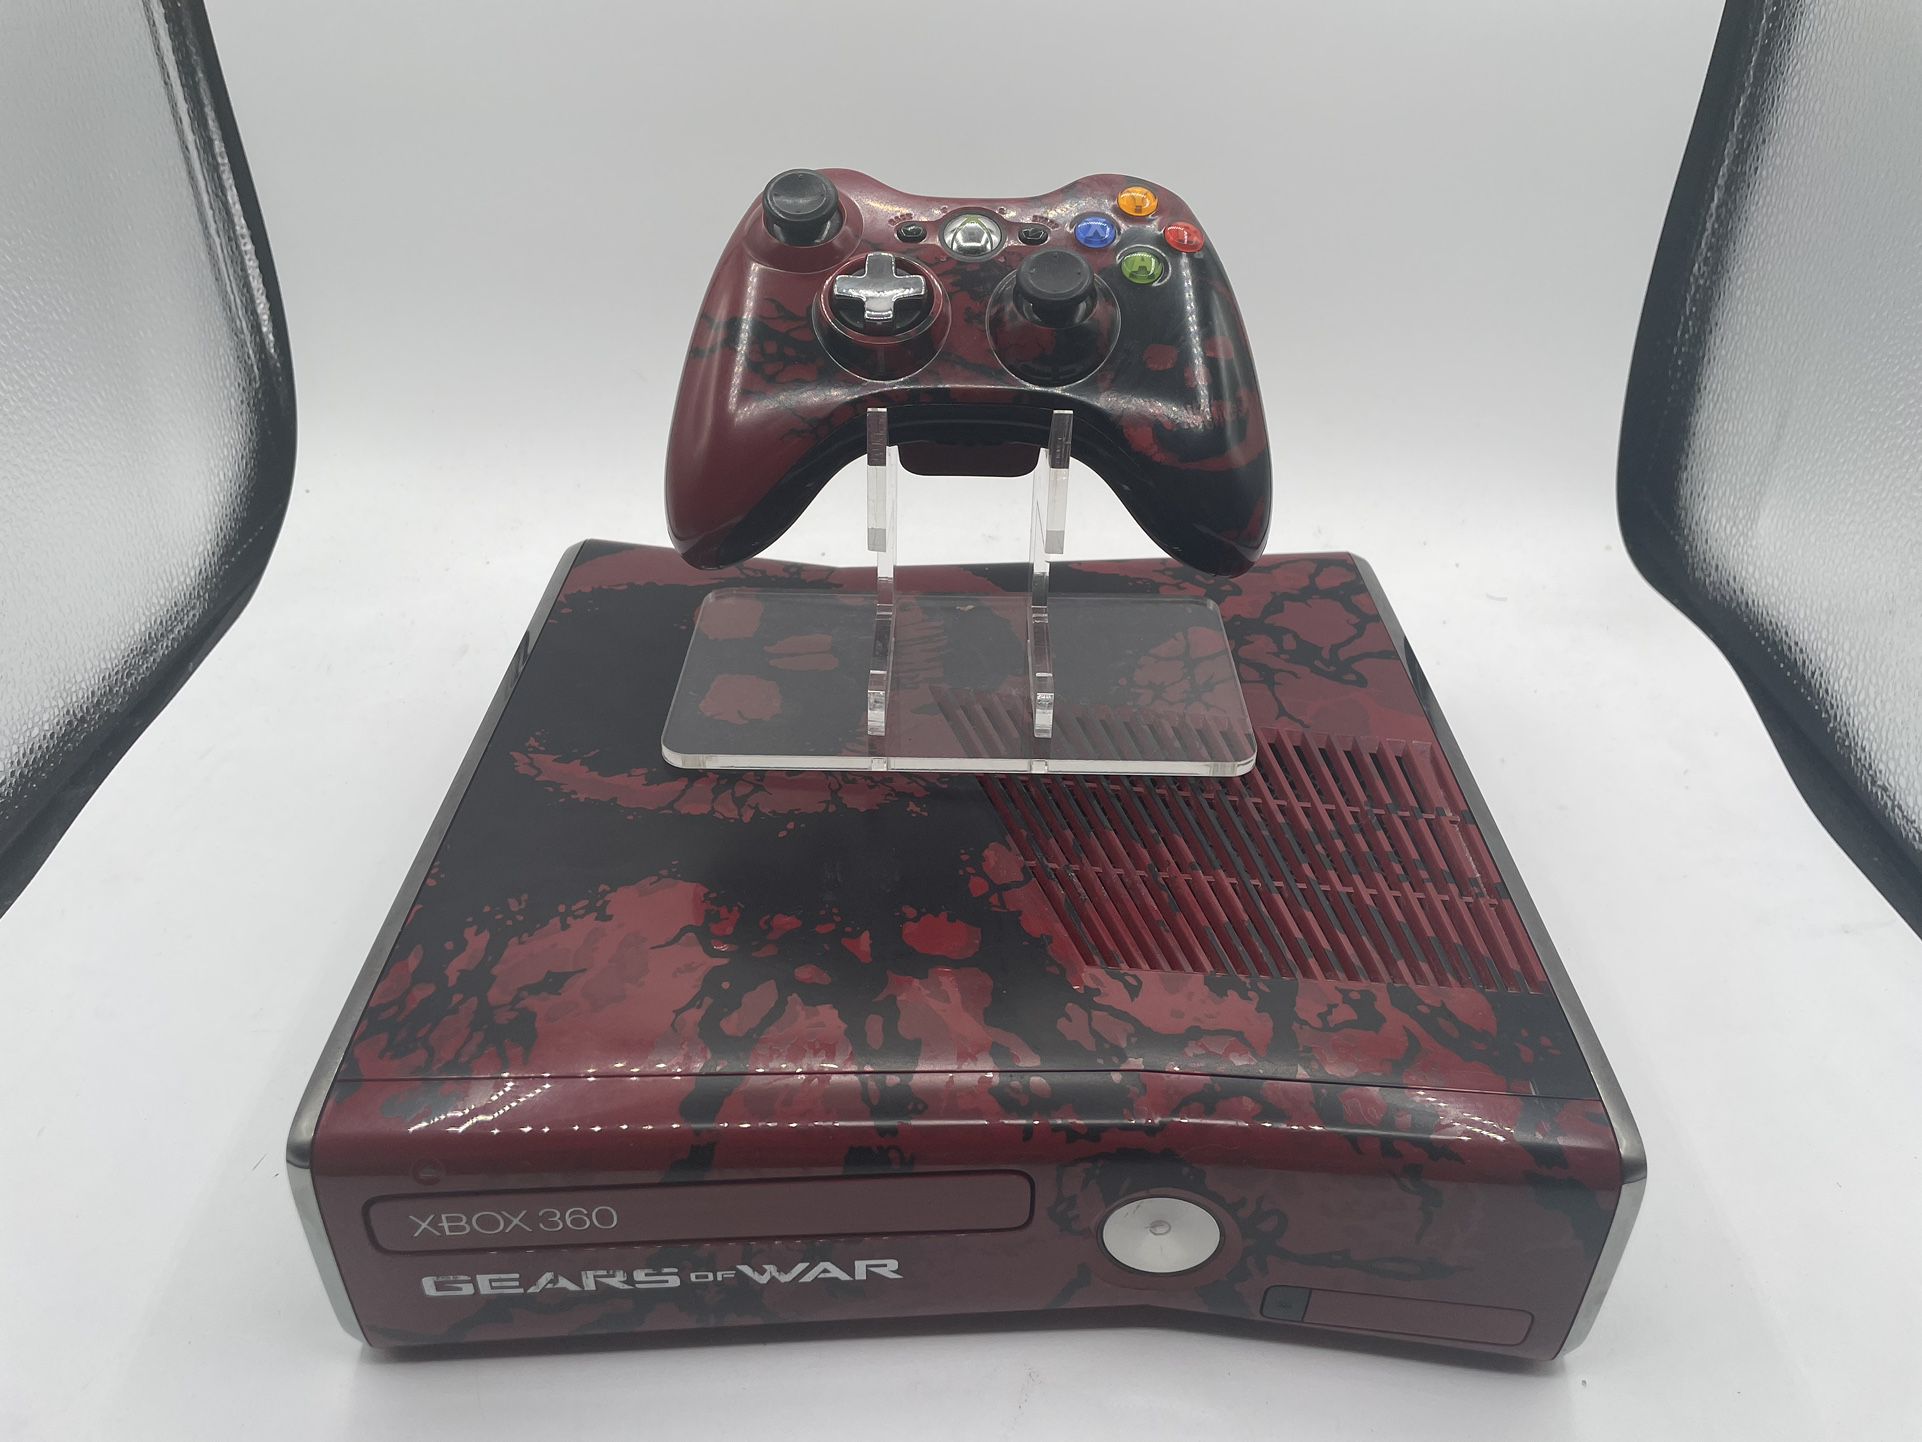 Microsoft Xbox 360 S Gears of War 3 Limited Edition 320GB Red & Black  Console (NTSC) for sale online